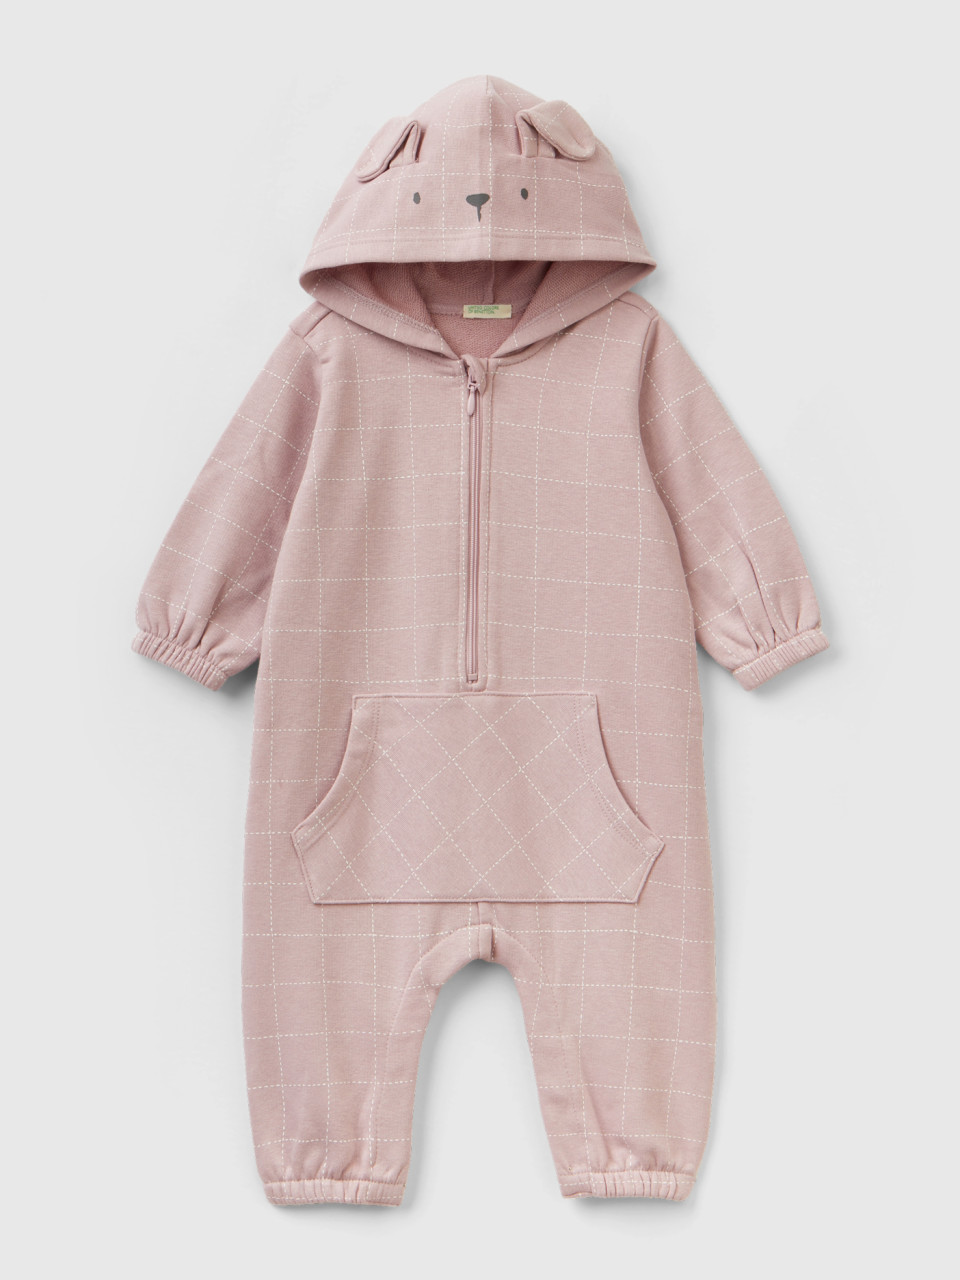 Benetton, Check Jumpsuit With Hood, Pink, Kids